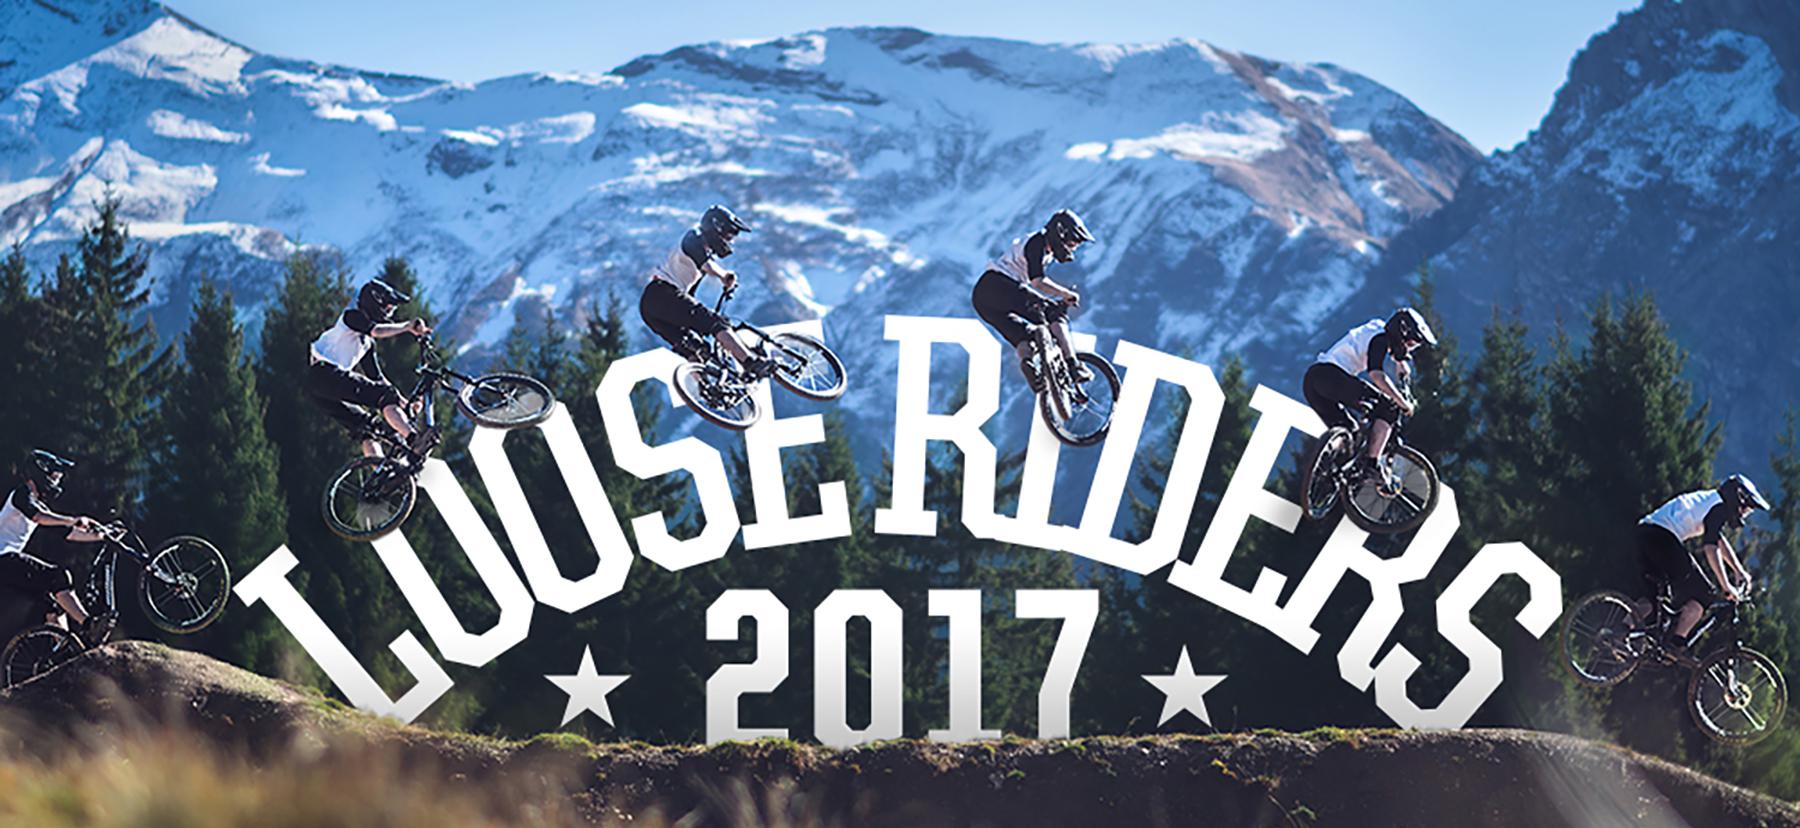 Loose riders clothing for downhill and freeride global alliance